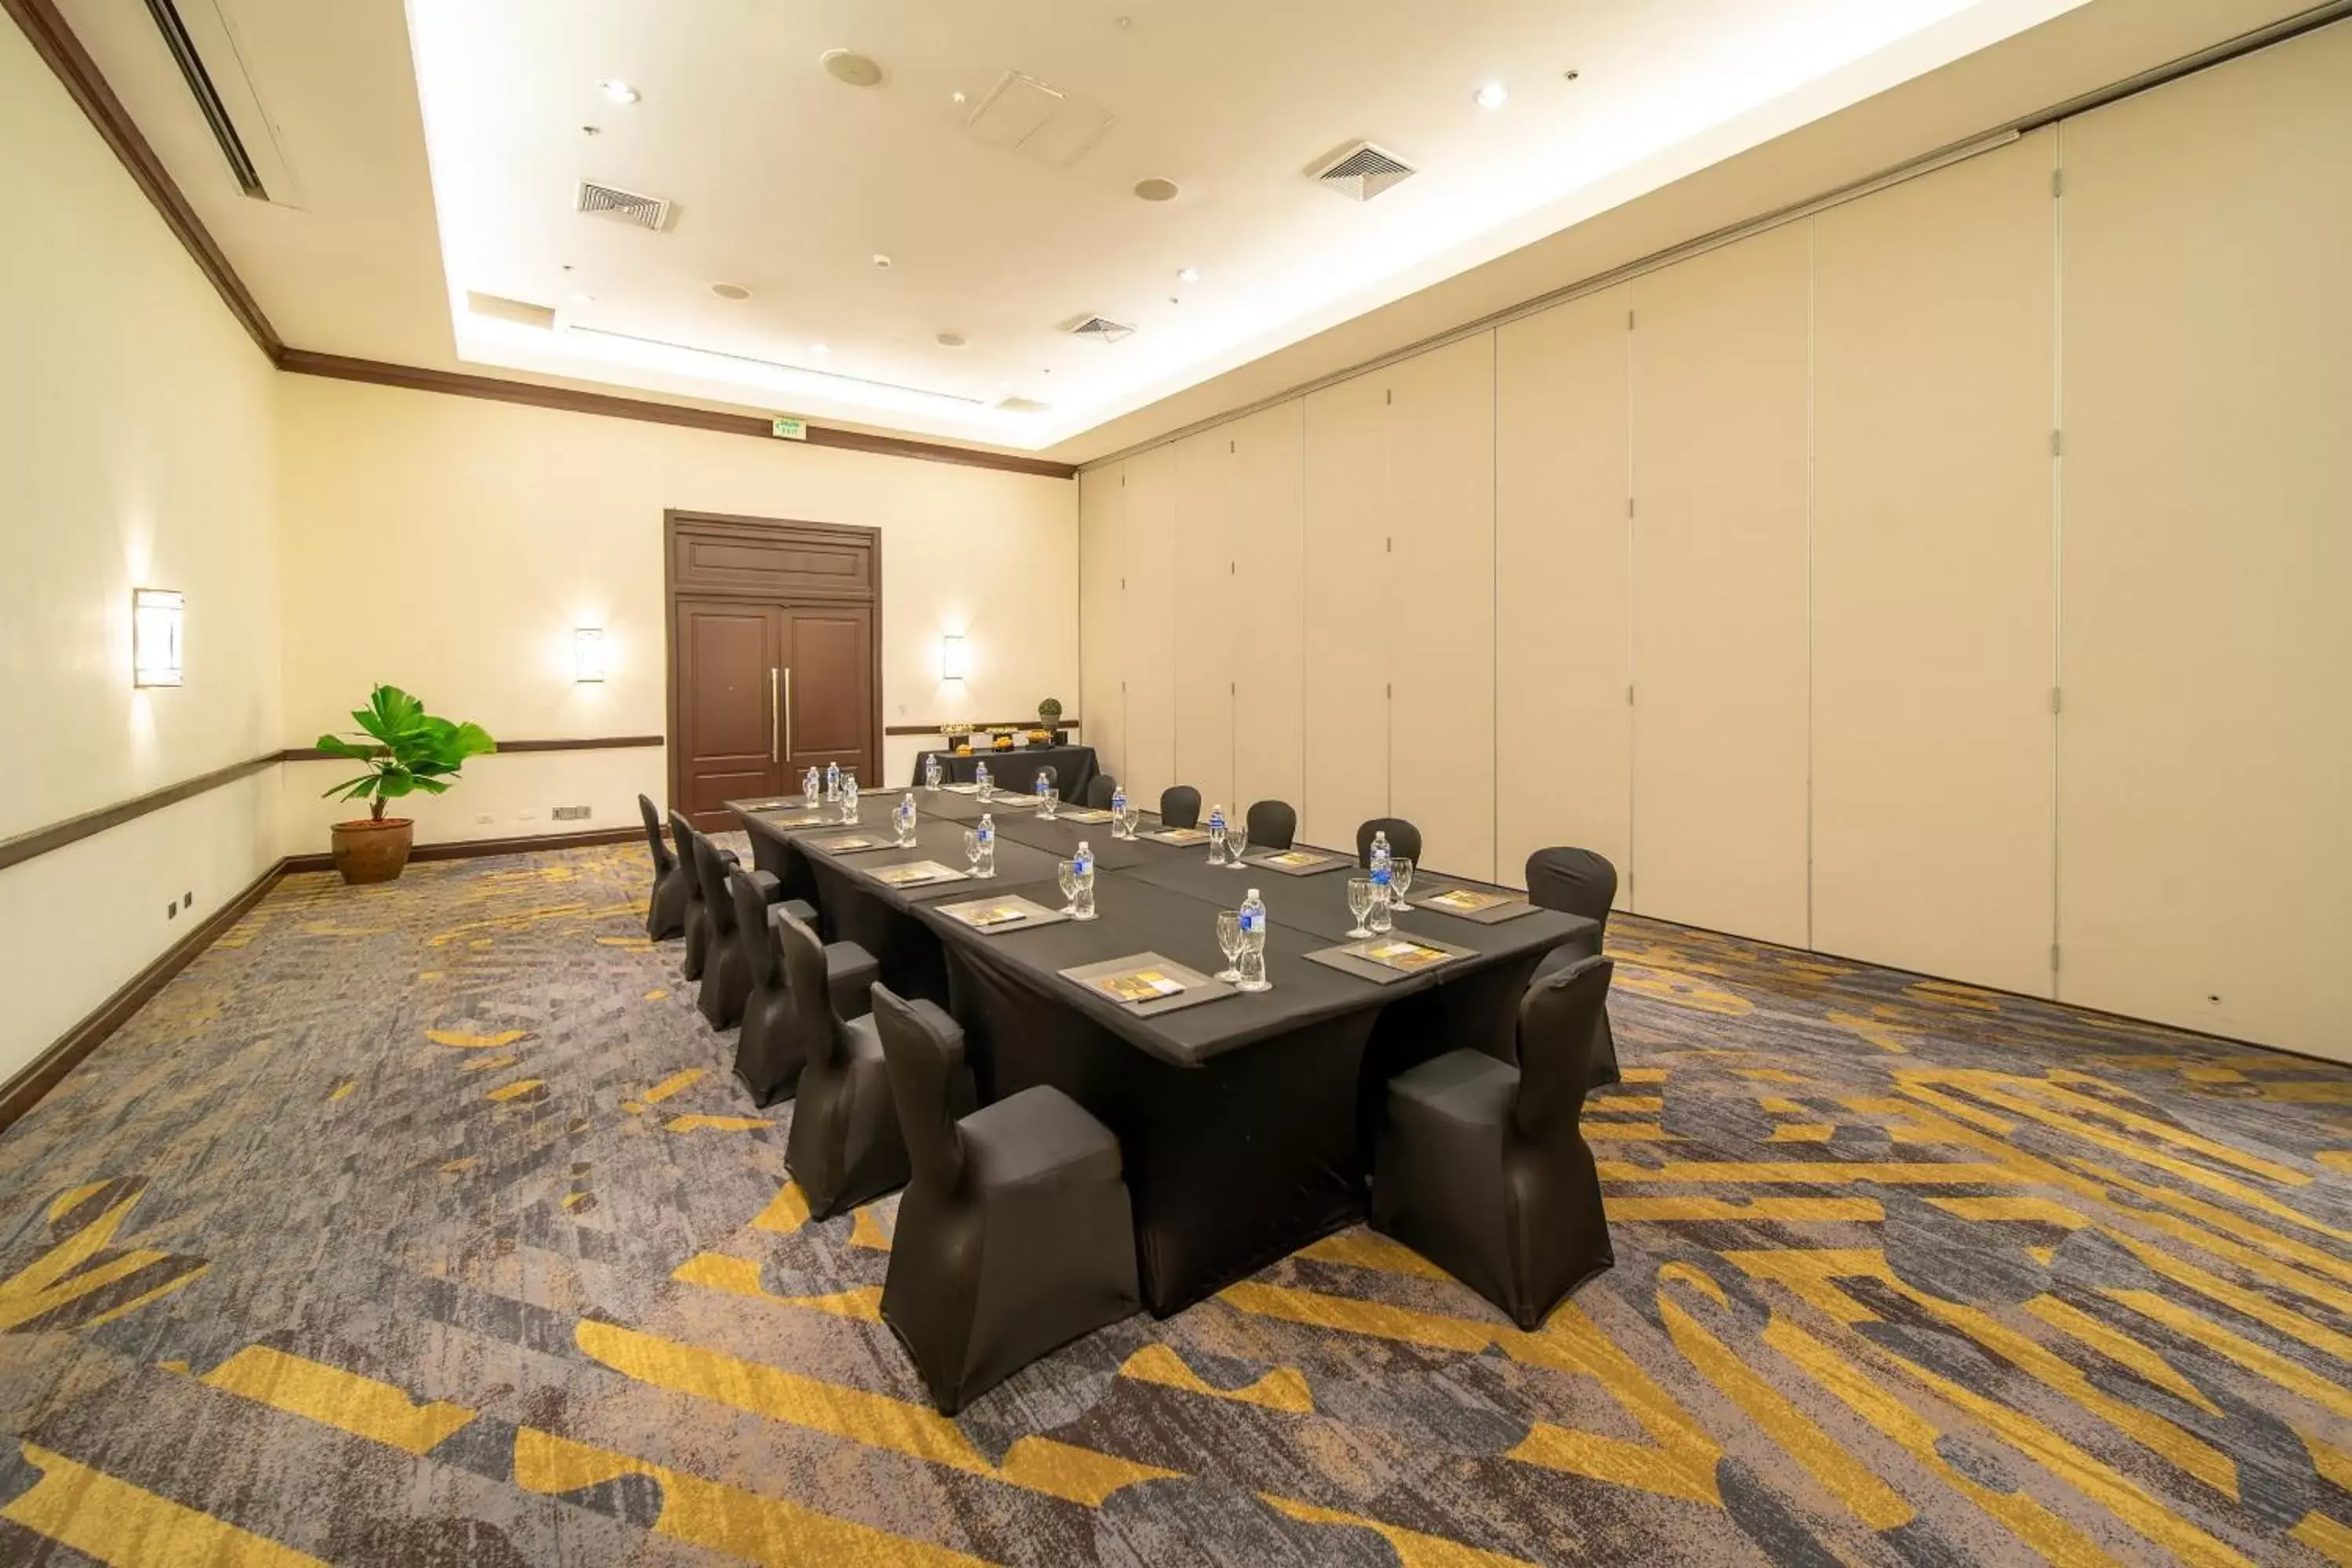 Meeting/conference room in Hotel Real InterContinental San Pedro Sula, an IHG Hotel